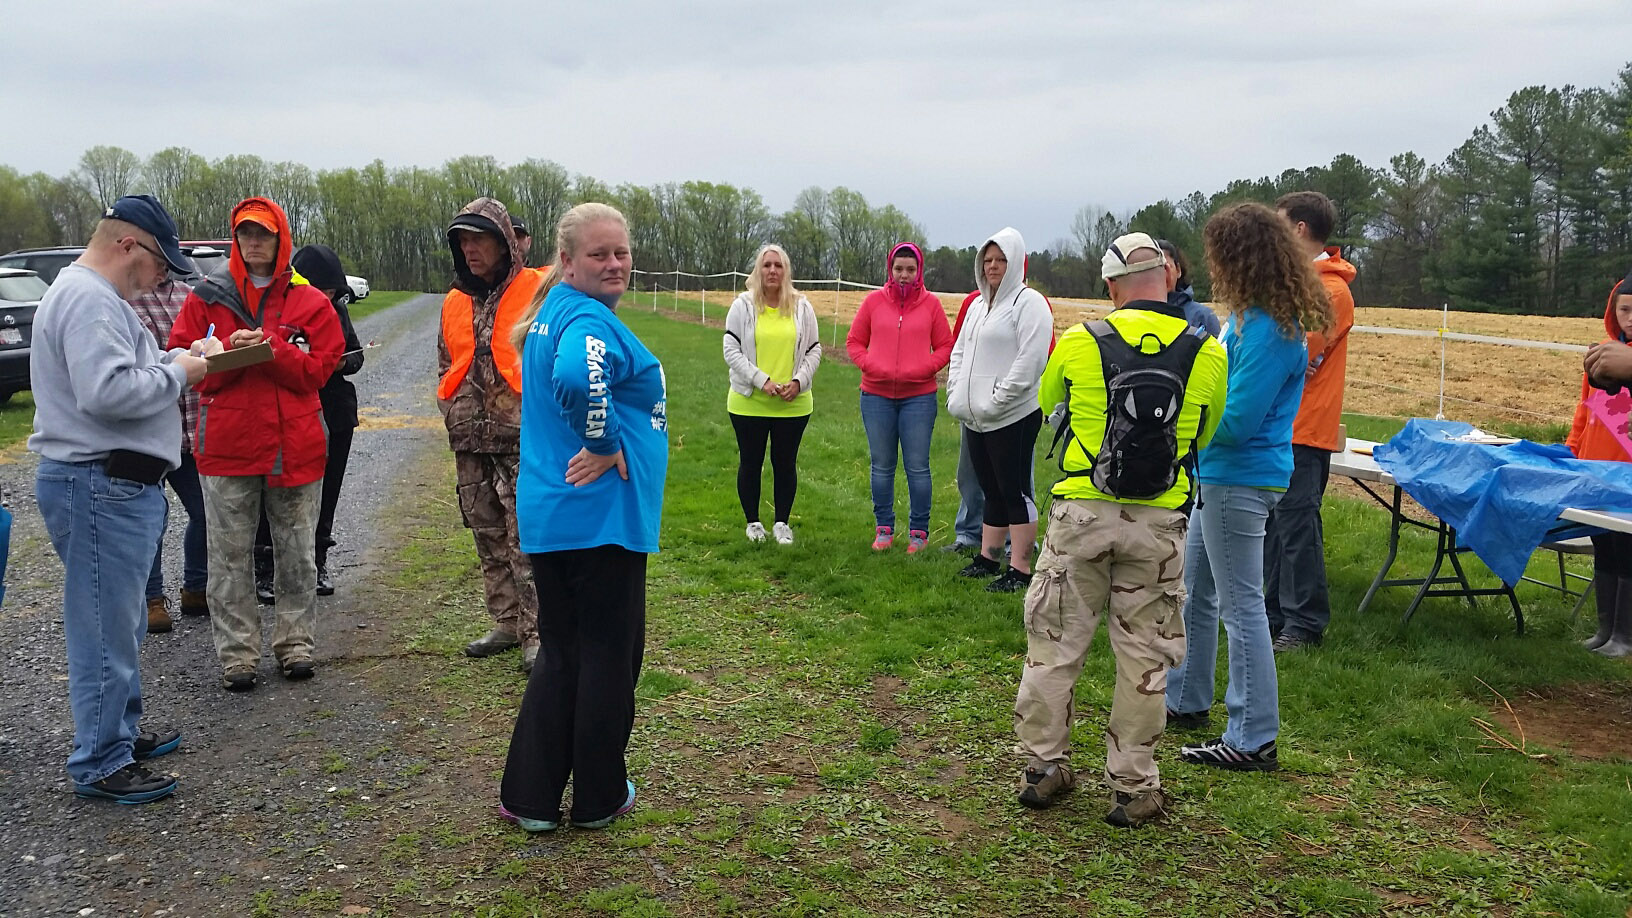 Volunteers gathered at Goshen Recreational Park in Montgomery County on Saturday, April 2, 2016 to continue searching for Sarah and Jacob Hoggle, who disappeared in September 2014. (WTOP/Kathy Stewart)